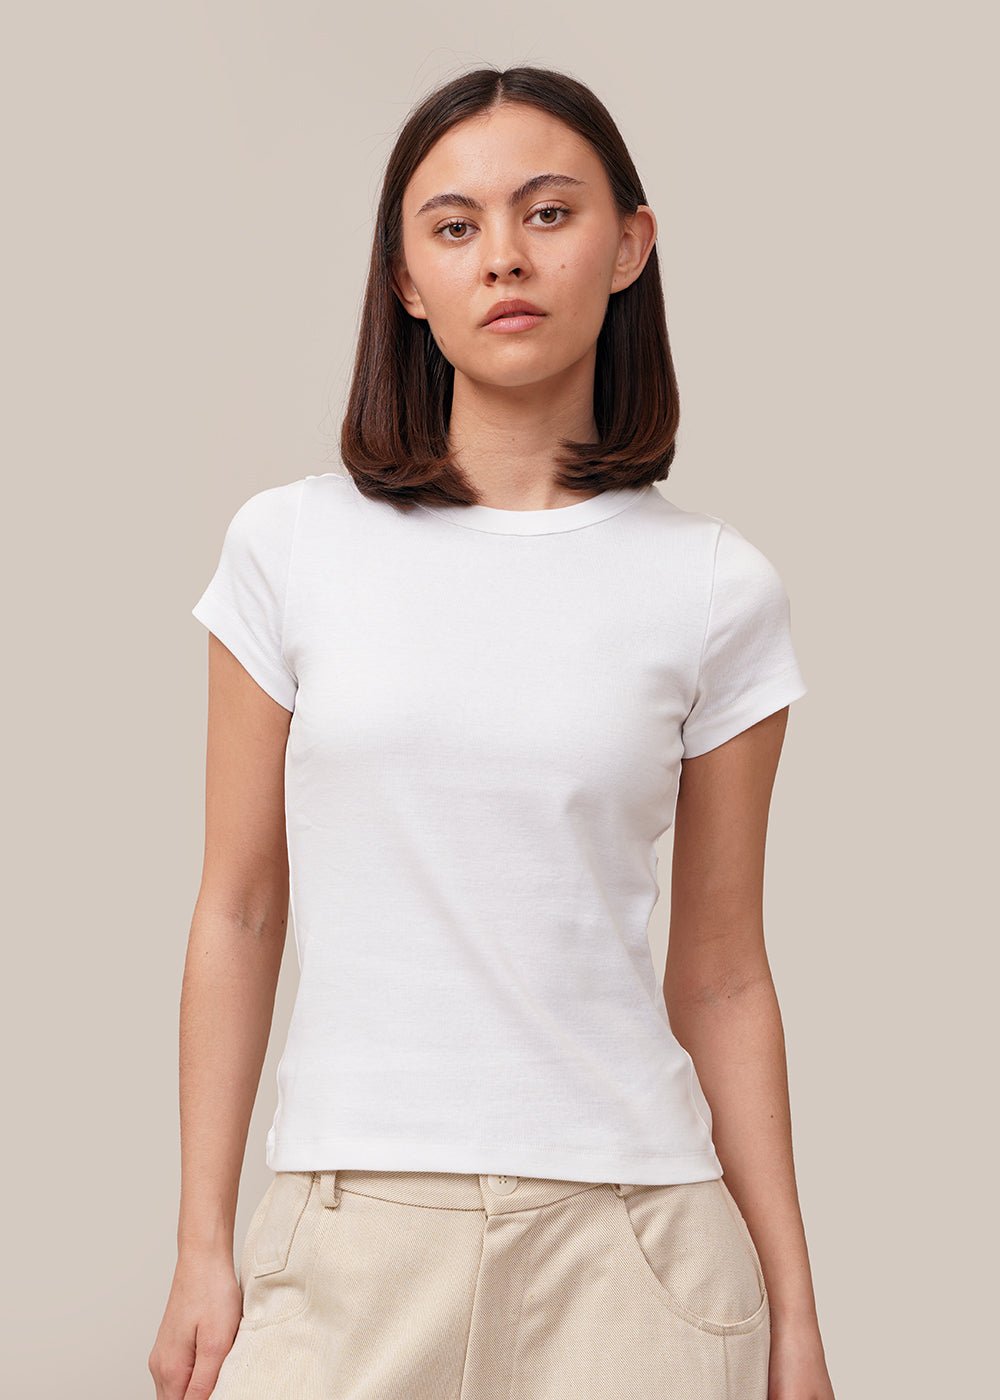 FLORE FLORE White Car Baby Tee - New Classics Studios Sustainable Ethical Fashion Canada